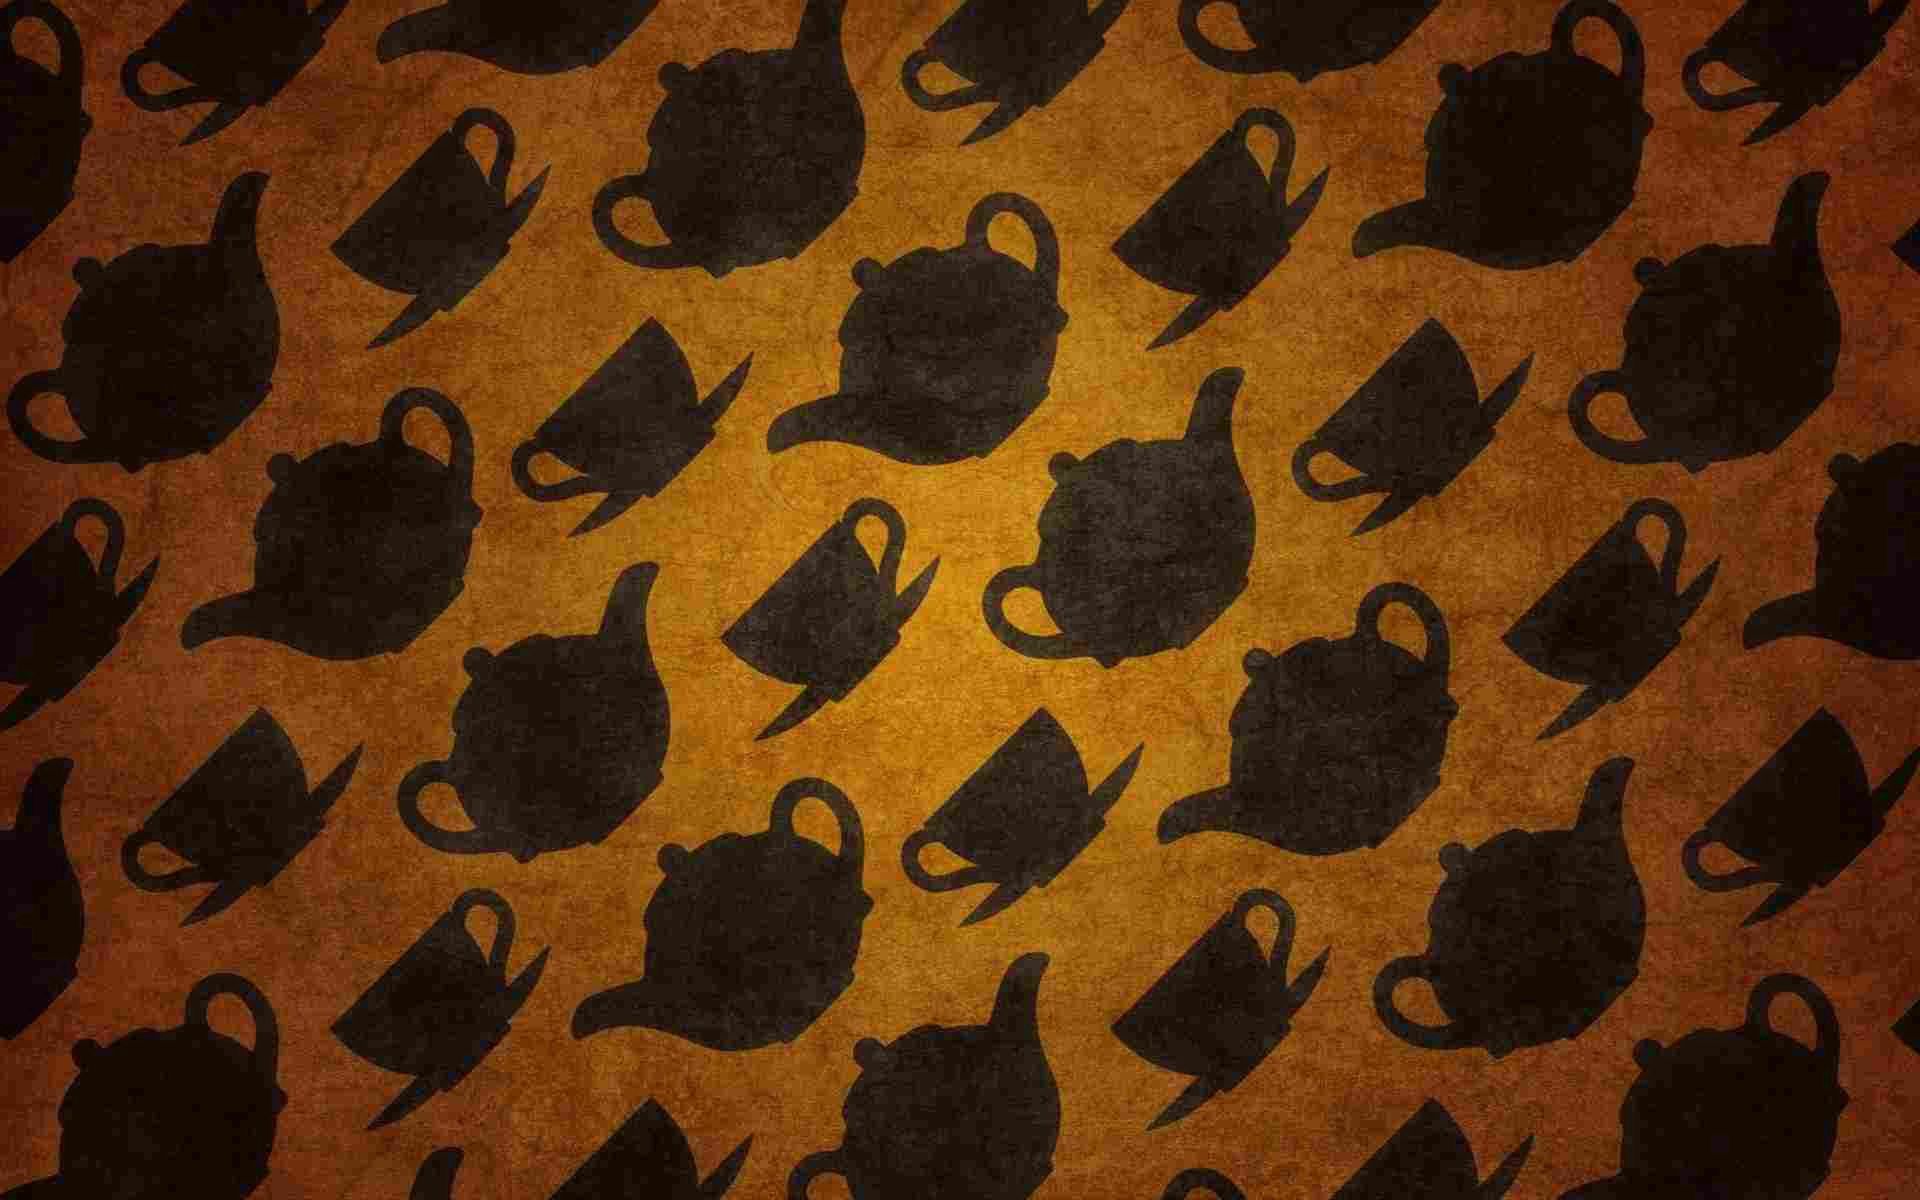 drawing, cups, symbols, characters, texture, textures, surface, picture, kettles, teapots 2160p